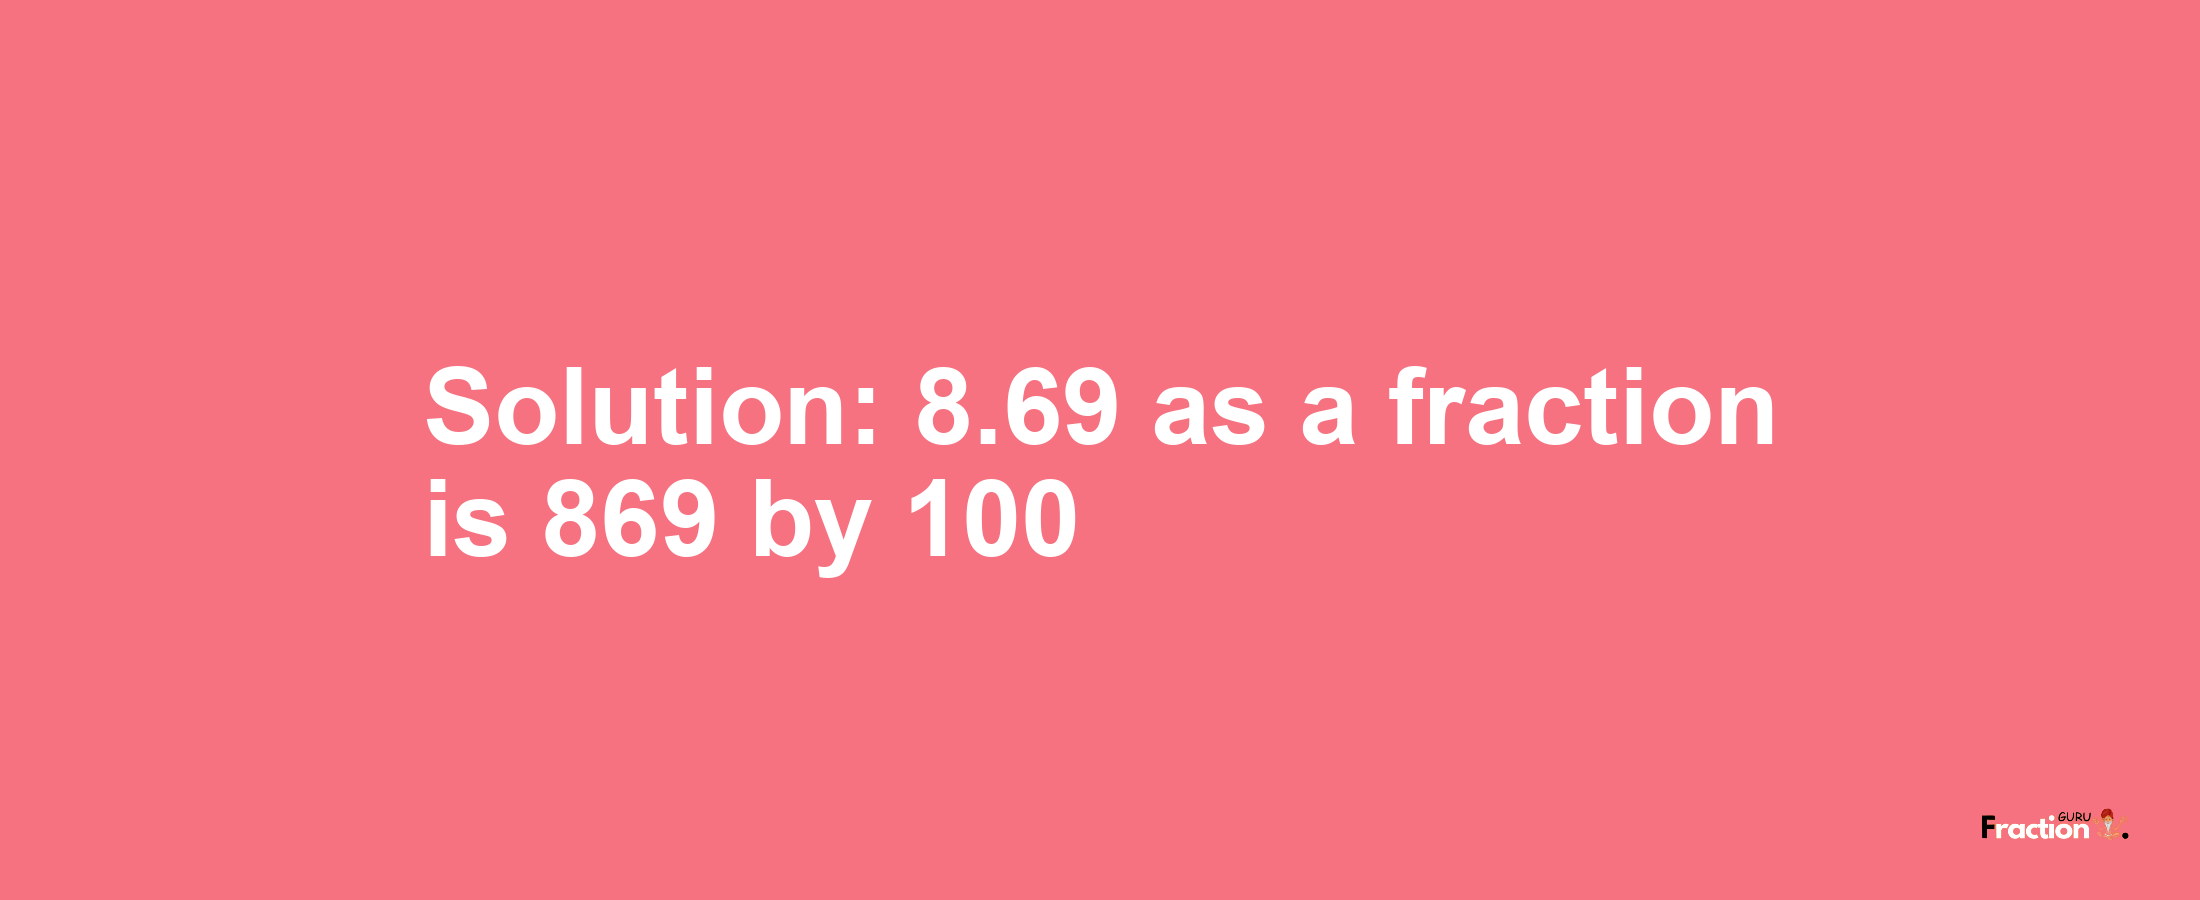 Solution:8.69 as a fraction is 869/100